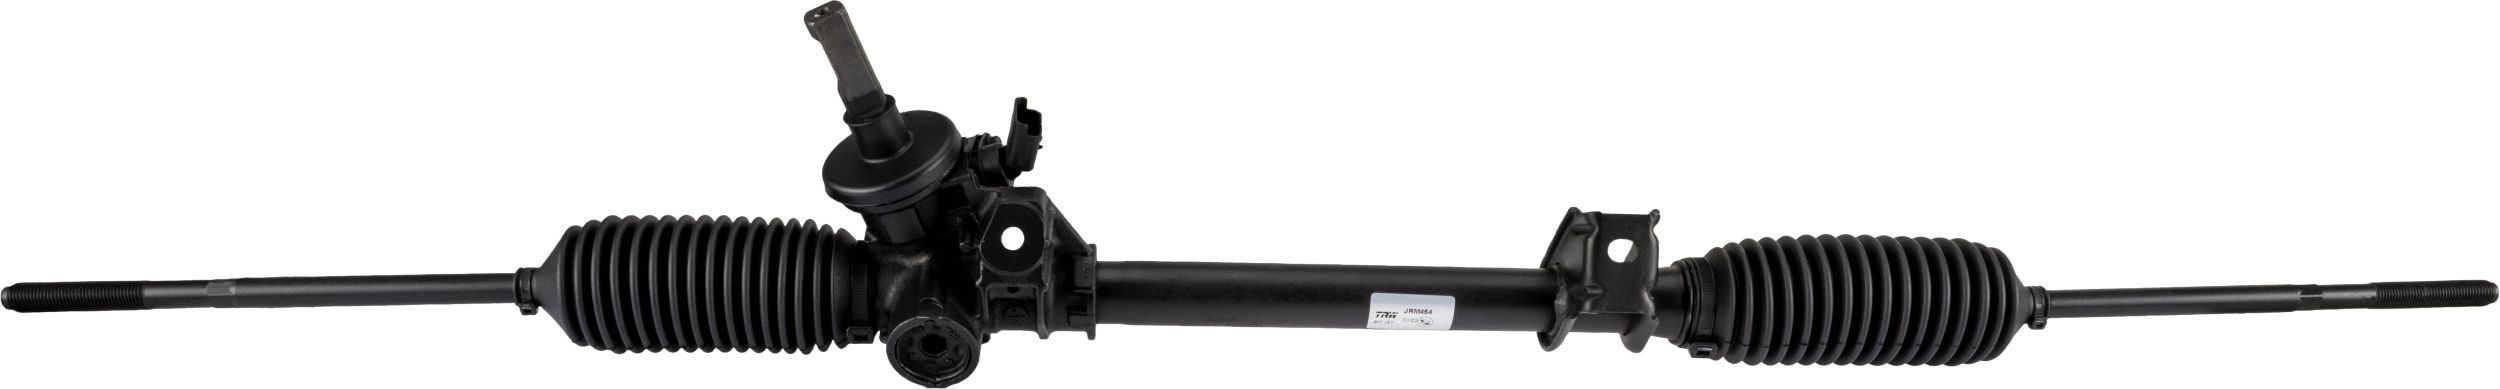 JRM454 TRW Power steering rack DODGE Mechanical, for left-hand drive vehicles, untoothed, 1110 mm